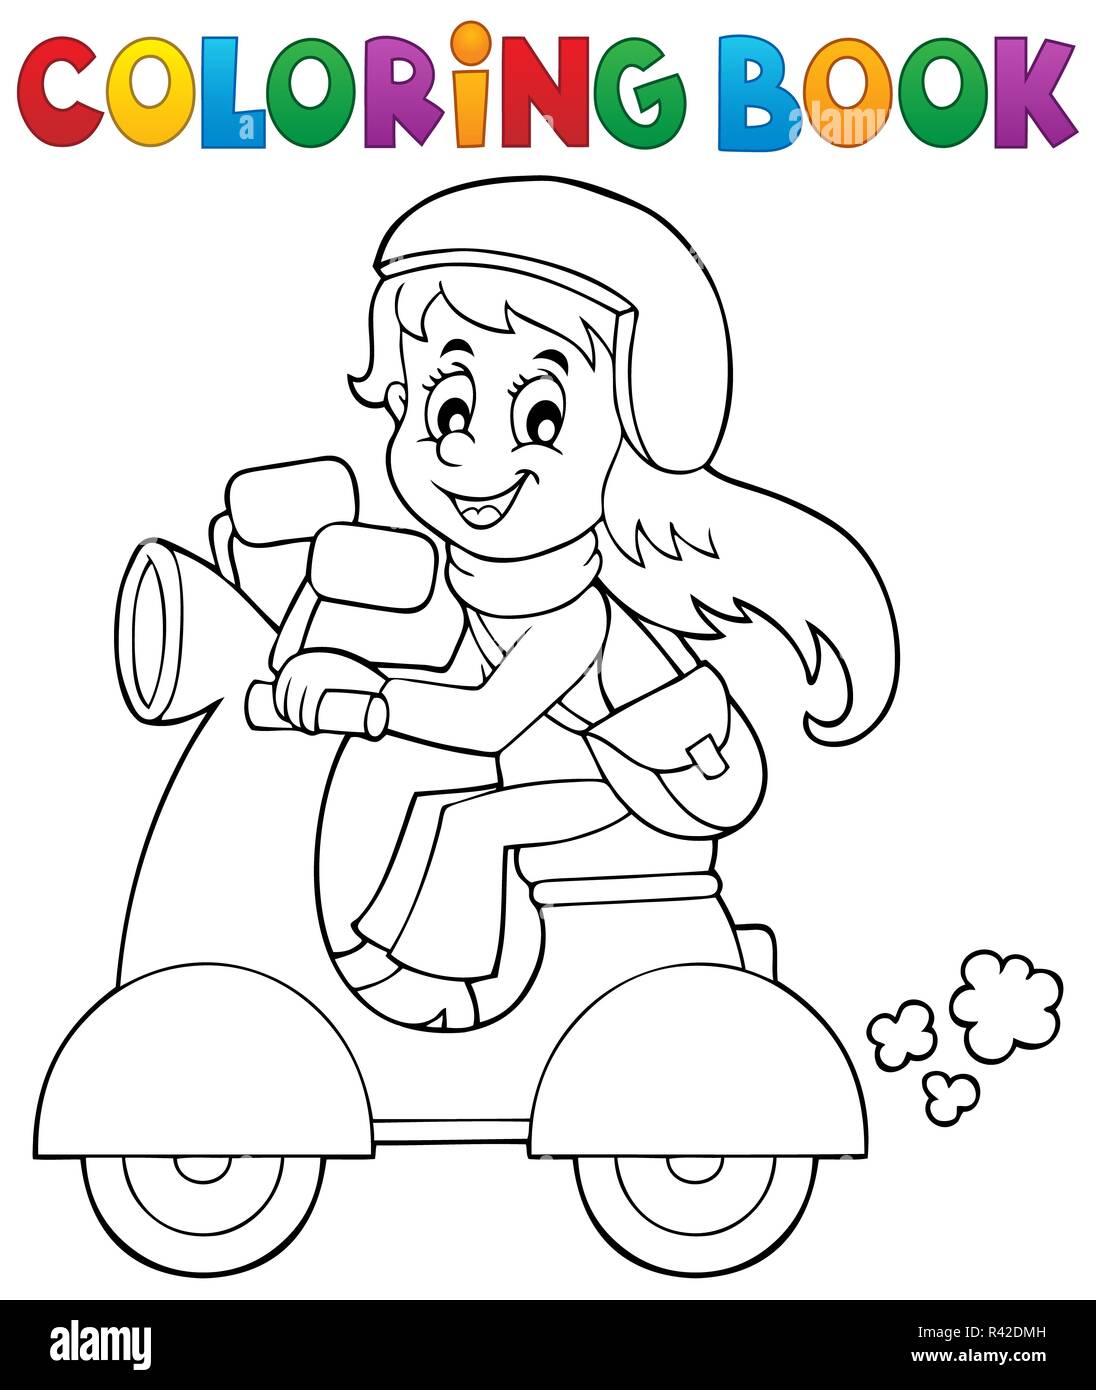 Coloring book girl on motor scooter stock photo